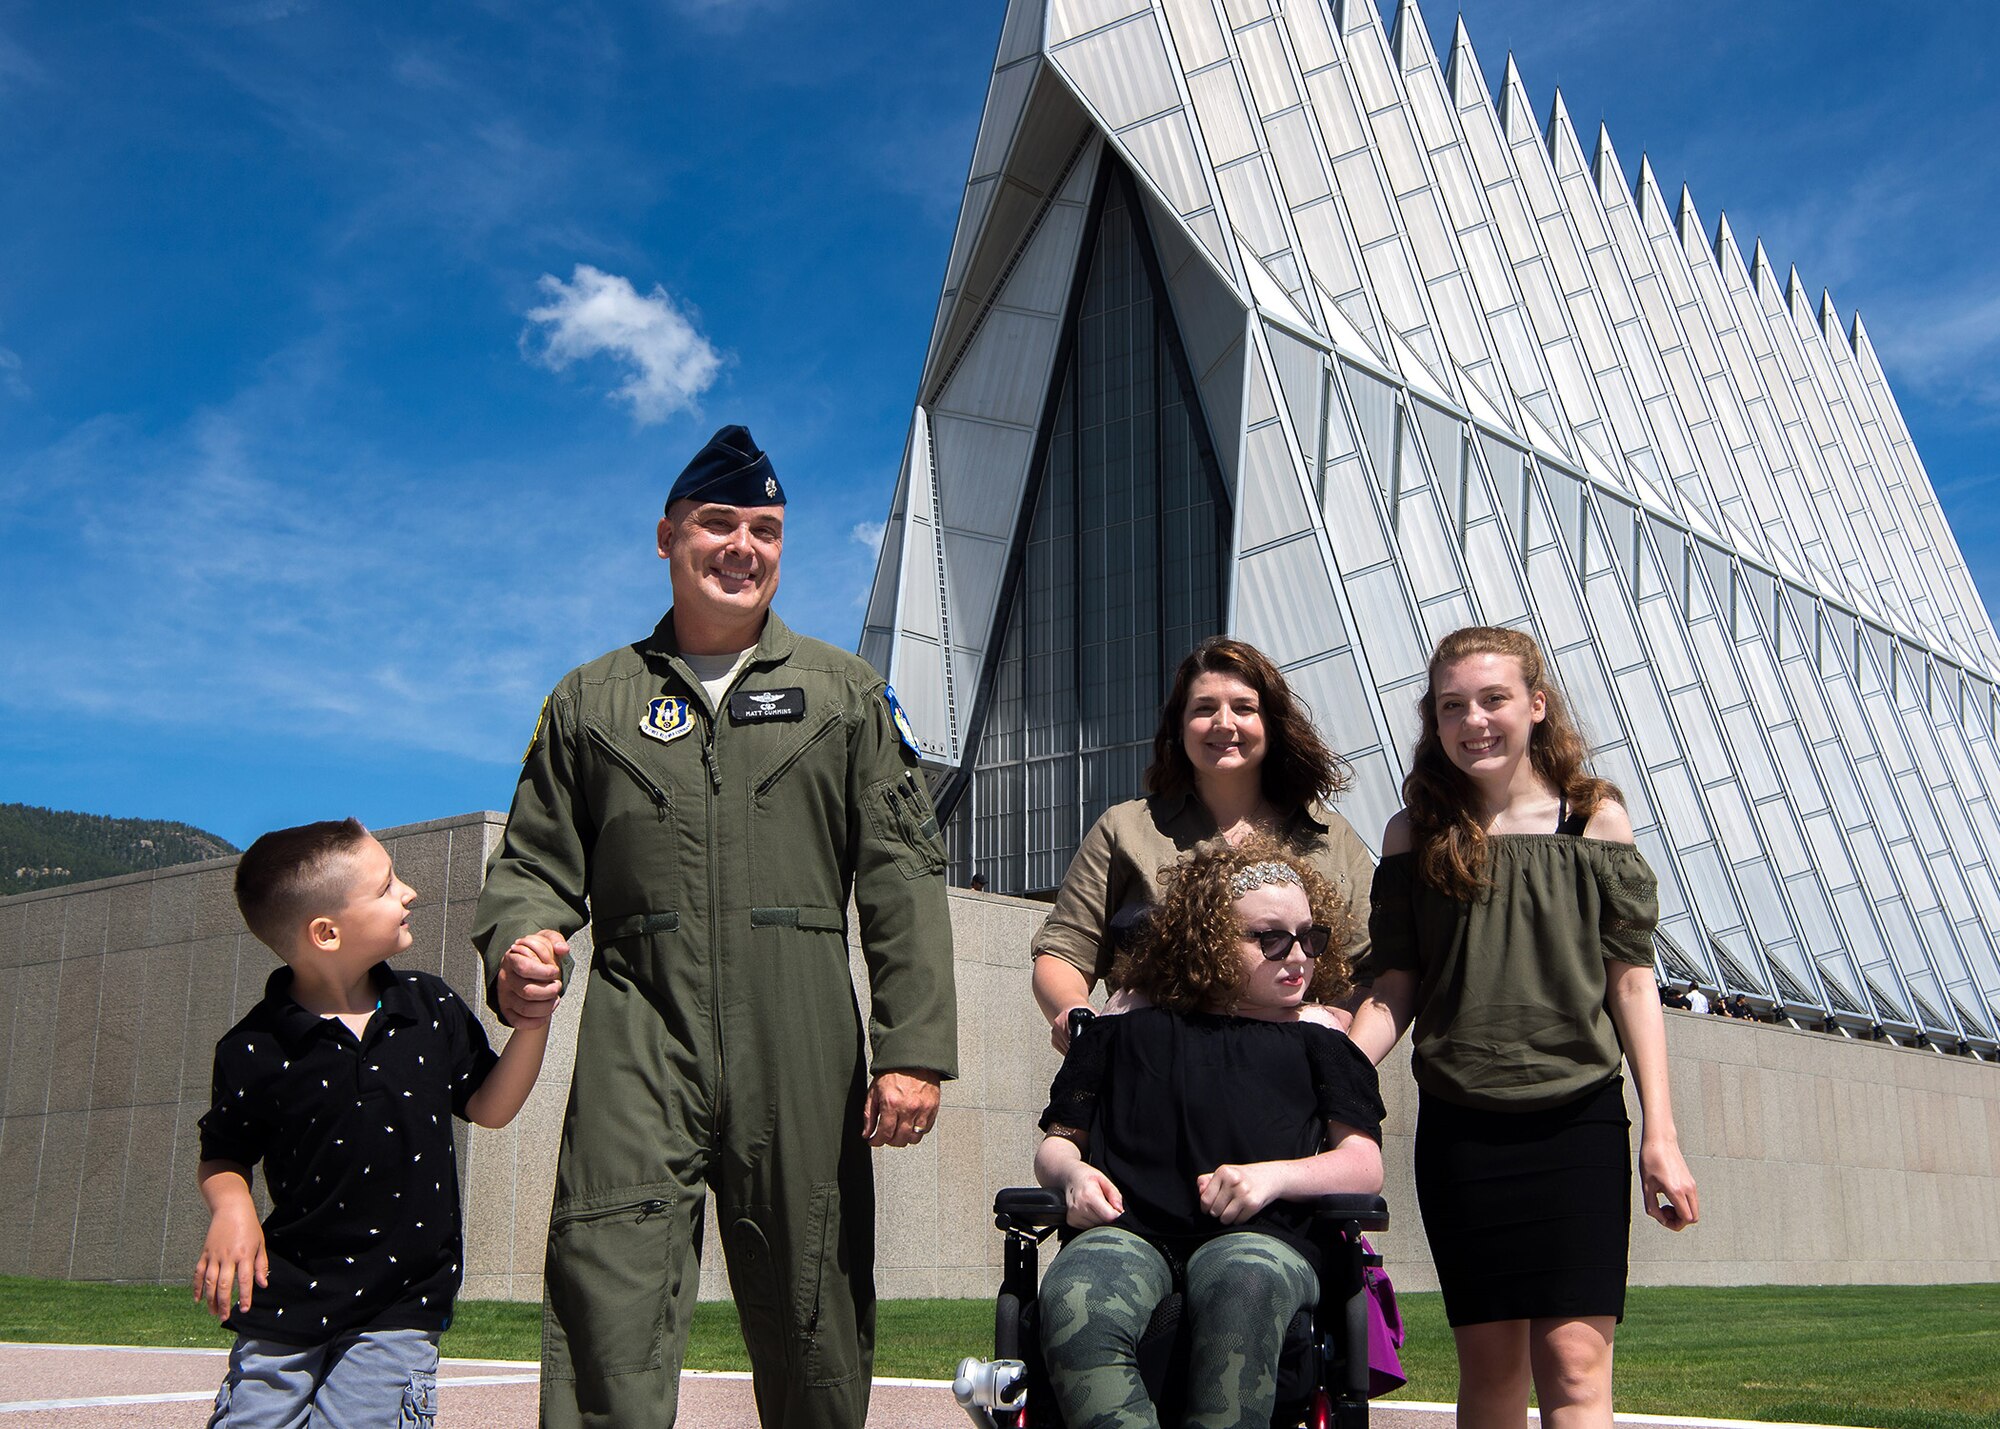 Anna Cummins is the 2022 Military Child of the Year for the Air Force.